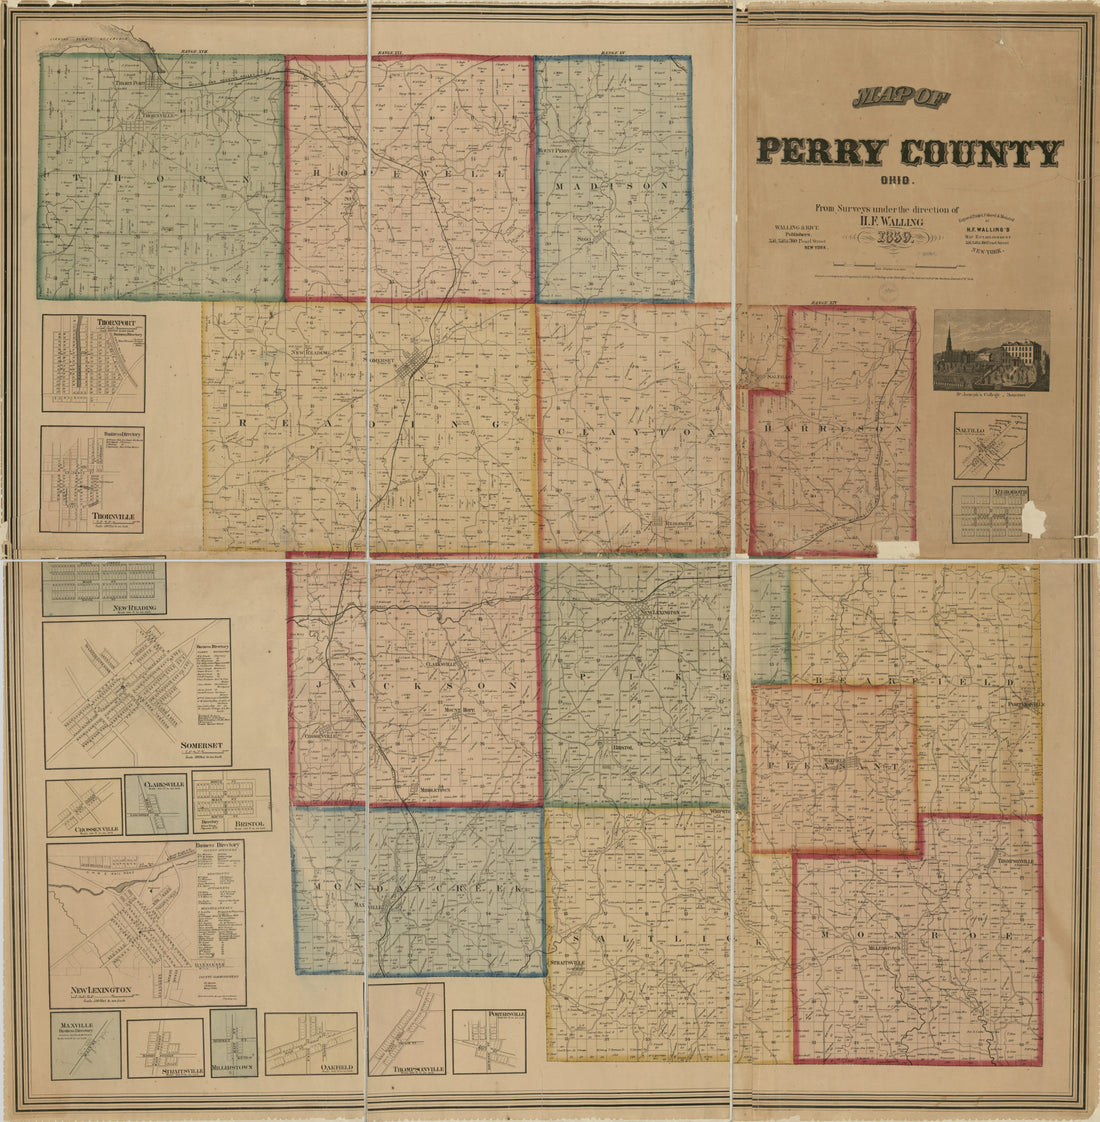 This old map of Map of Perry County, Ohio from 1859 was created by  H.F. Walling&